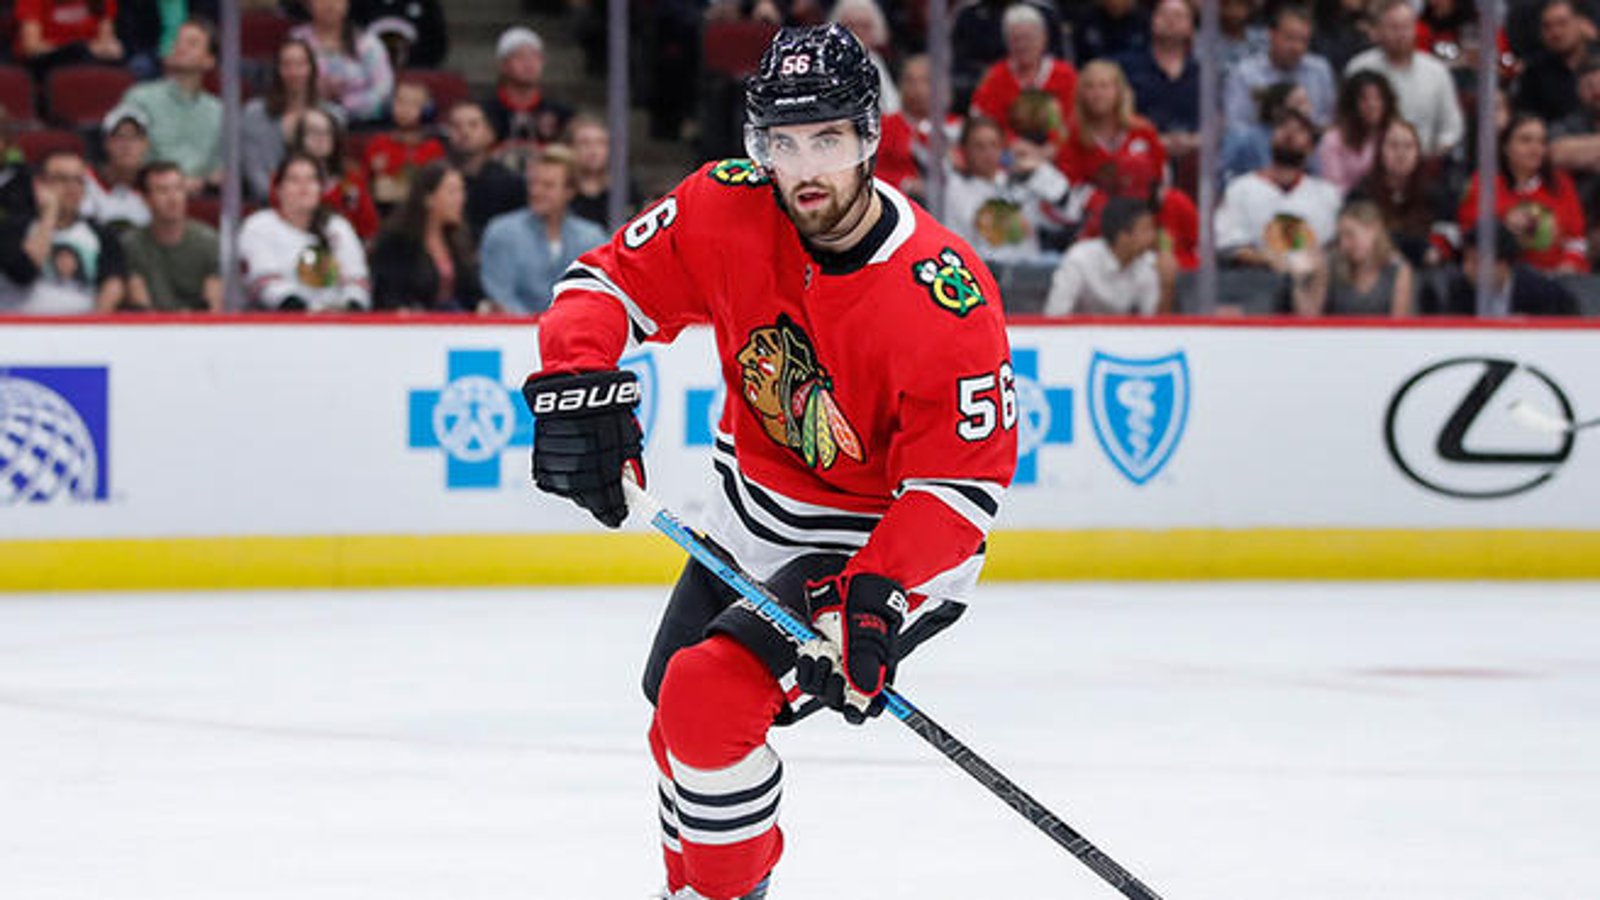 Hawks pull Gustafsson from lineup minutes before game